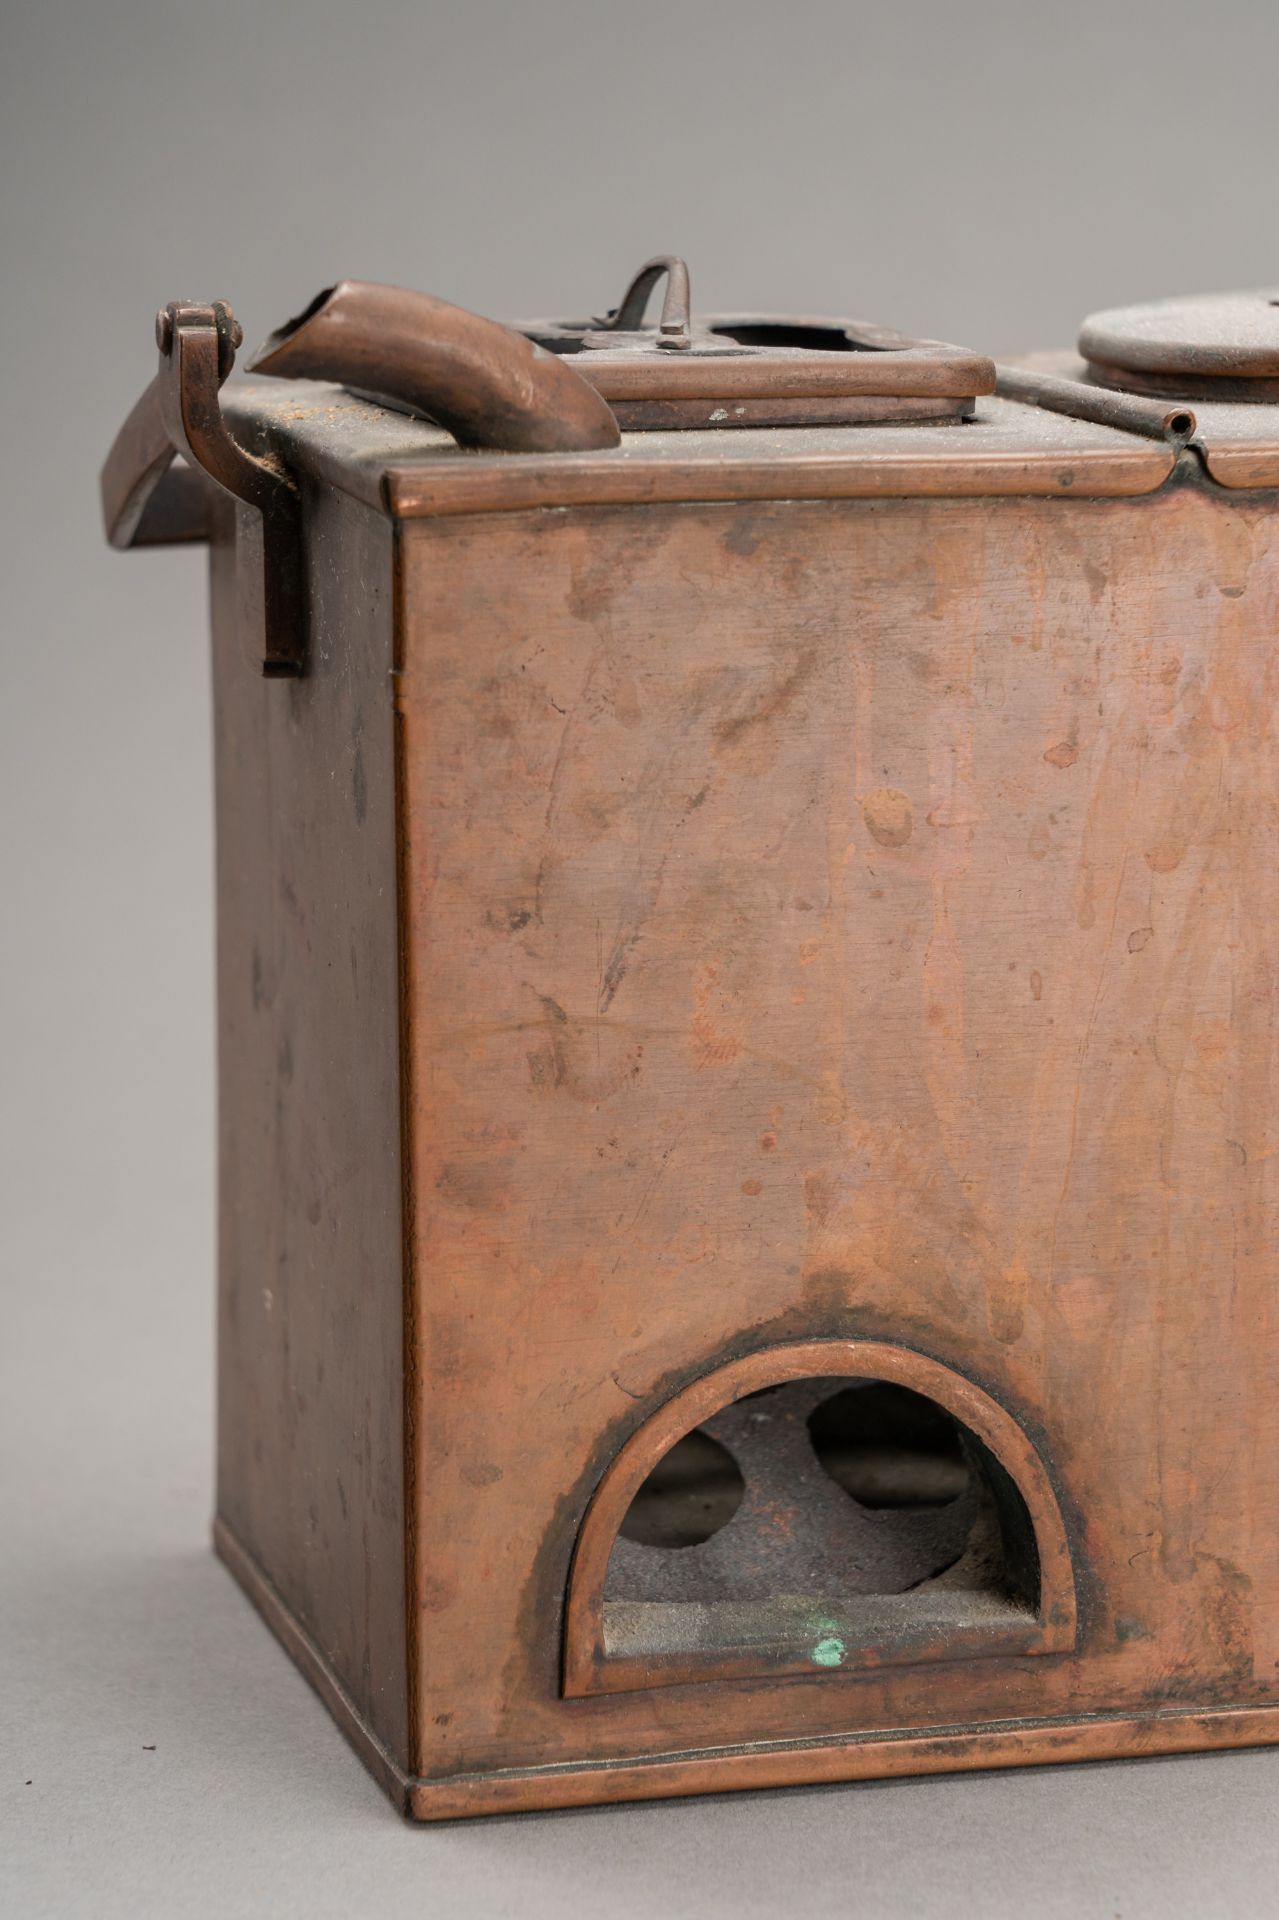 A WOODEN CHEST WITH DRAWERS AND A COPPER SAKE WARMER 'KANDOUKO', 19th CENTURY - Bild 17 aus 28